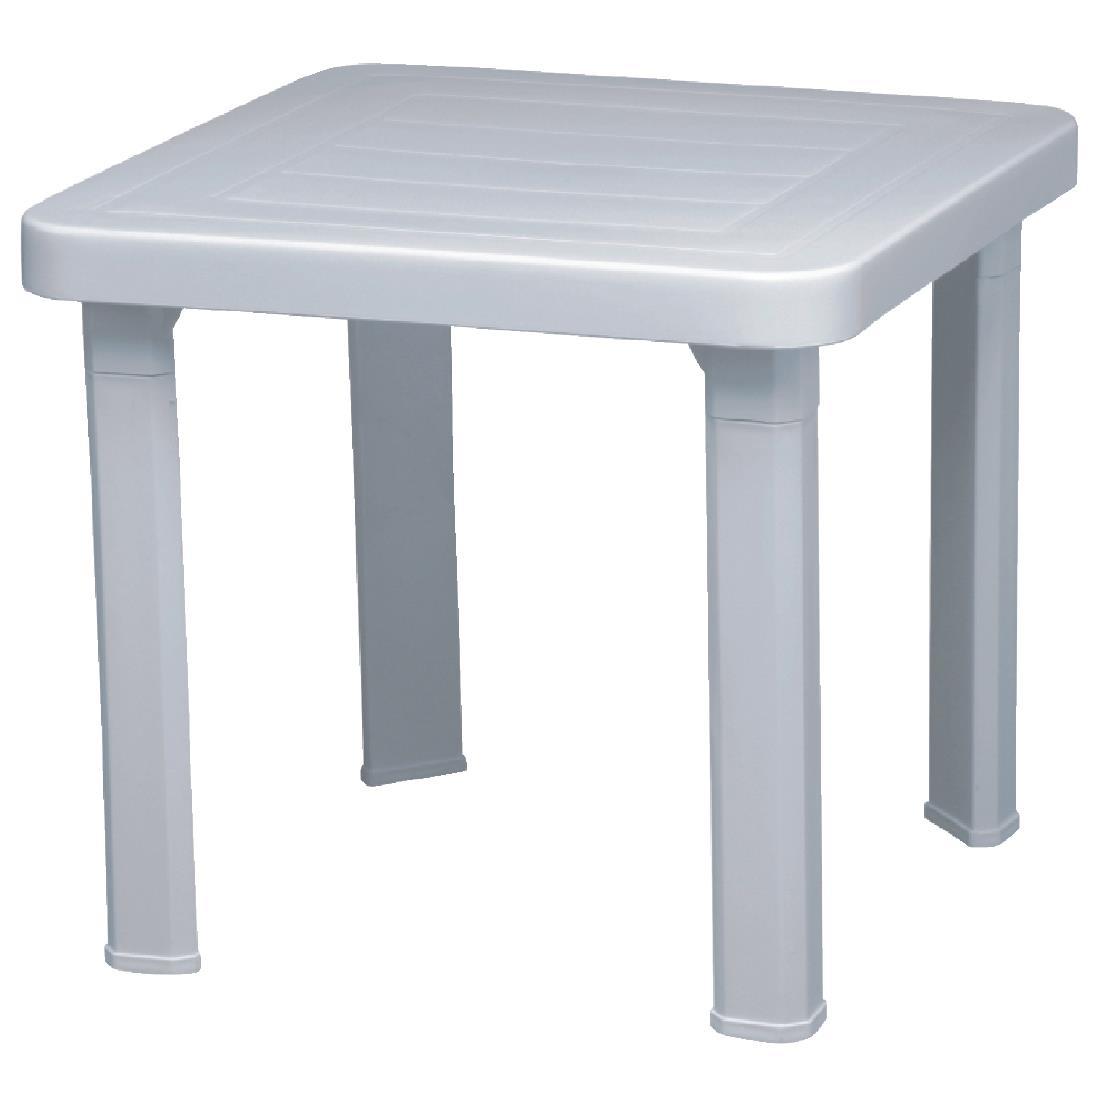 Resol Sun Lounger Side Tables 470mm (Pack of 6) - CF116  - 2